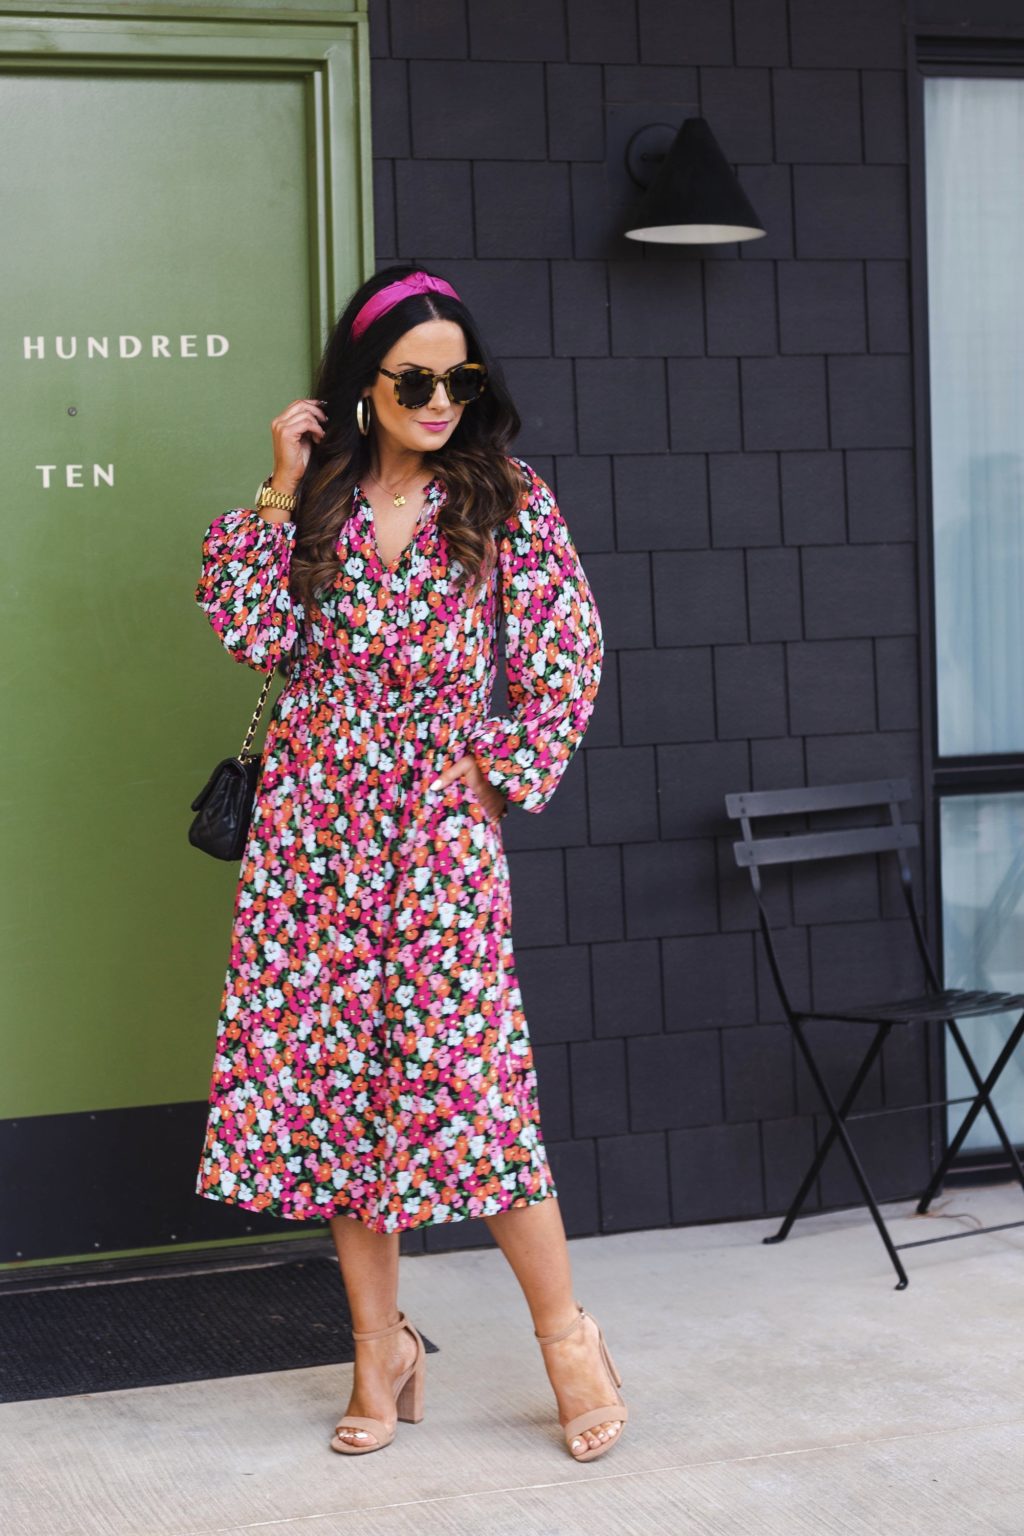 Perfect Spring Midi Dresses Under $40 - The Double Take Girls